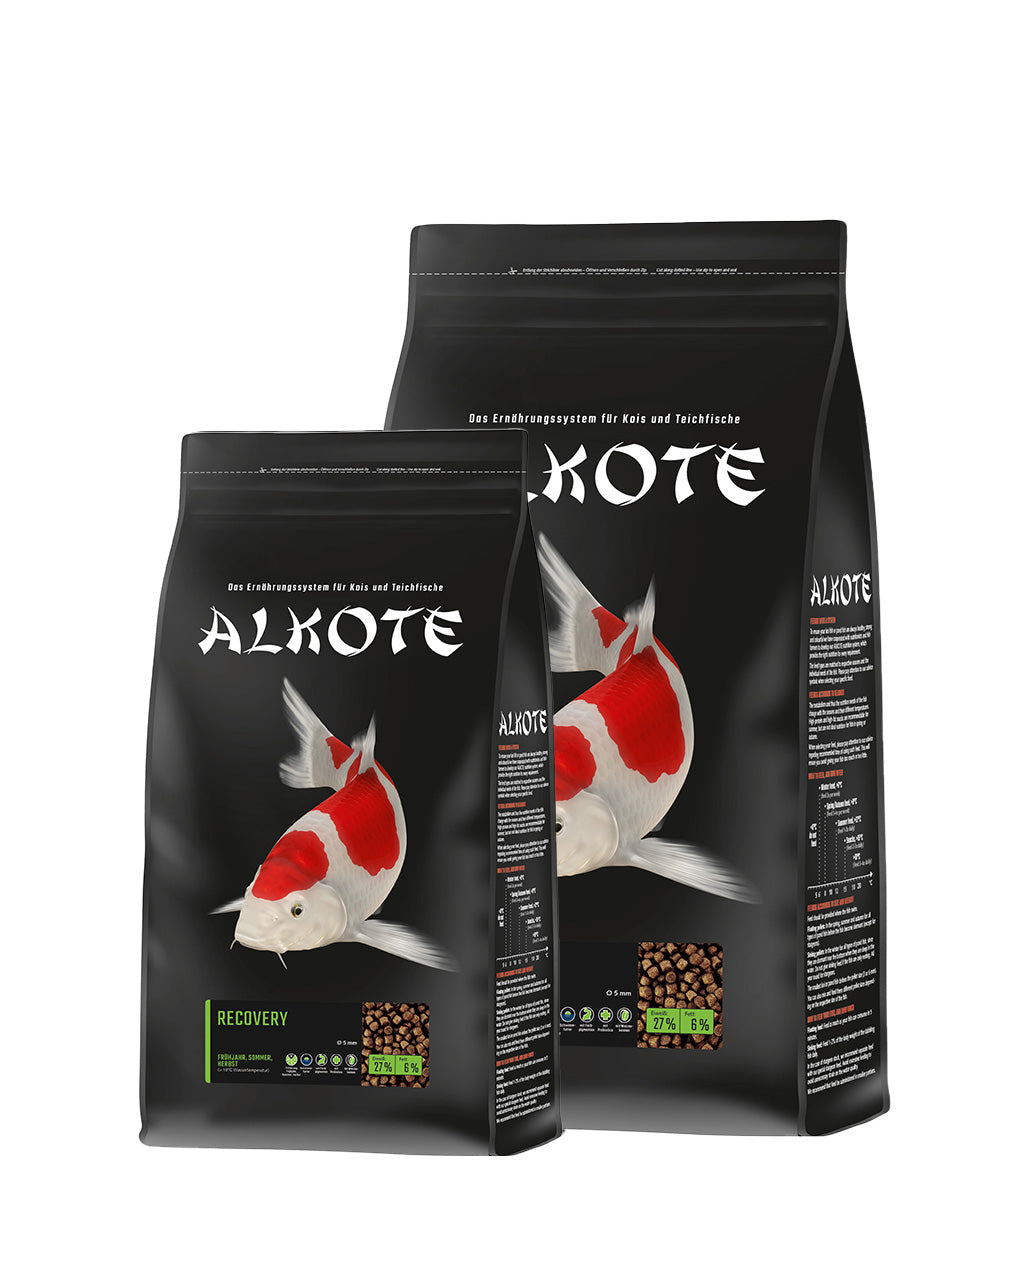 Alkote Recovery